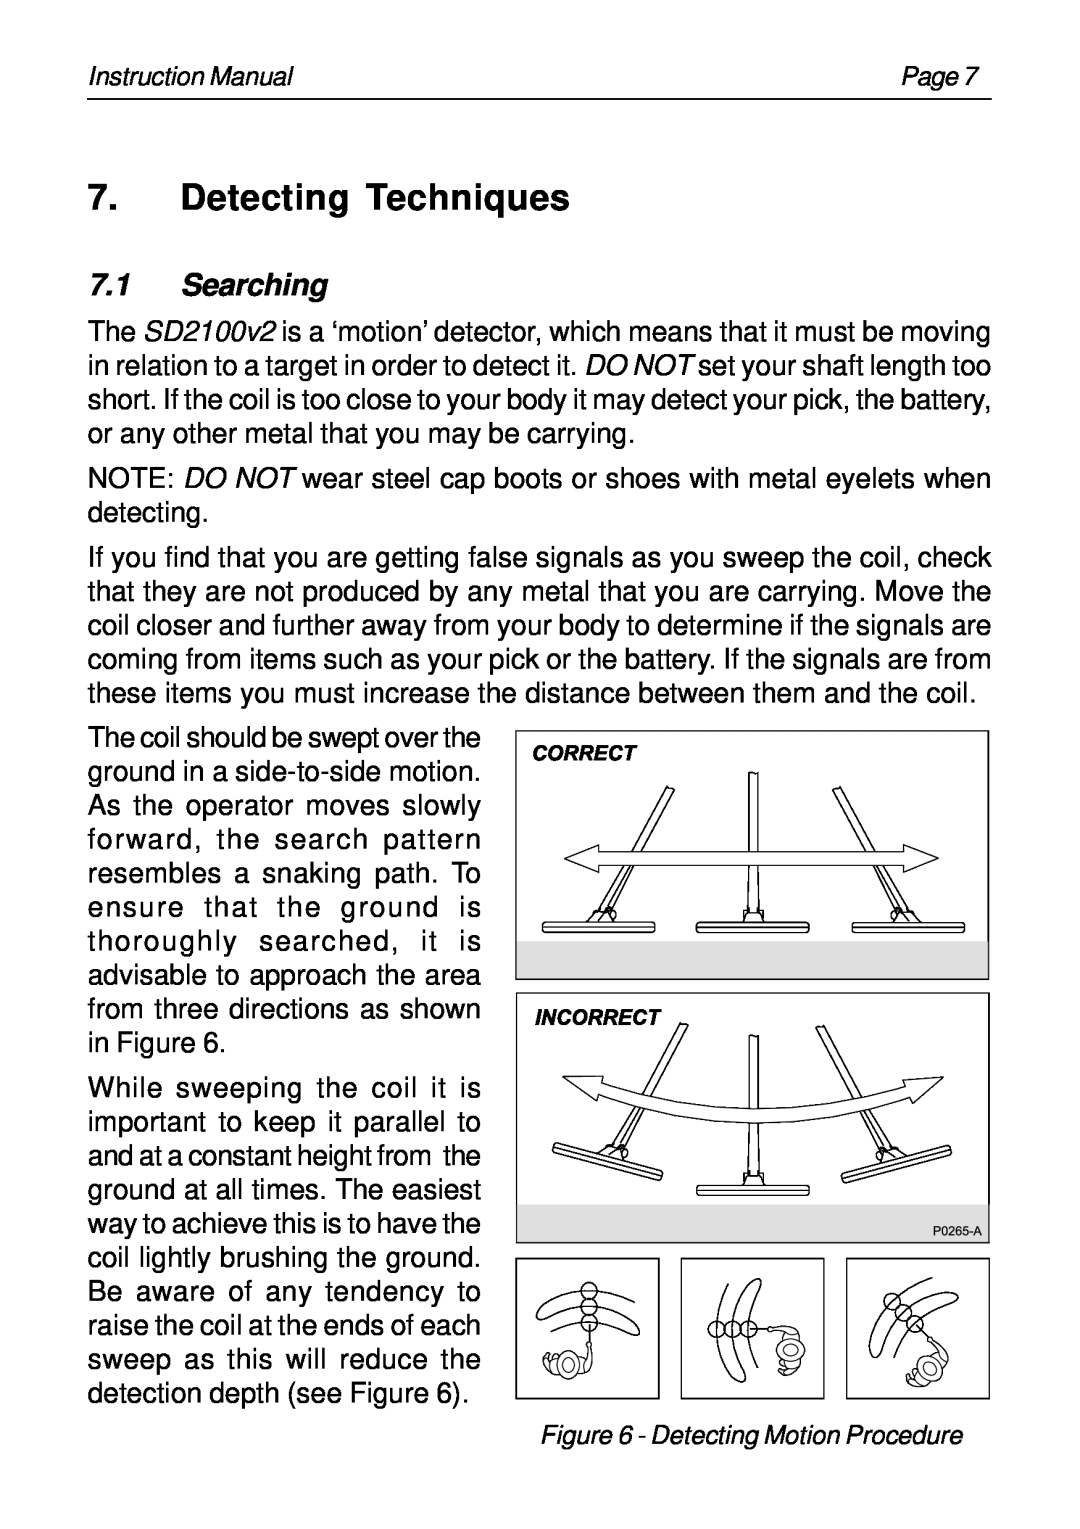 Minelab SD2100v2 instruction manual Detecting Techniques, Searching 